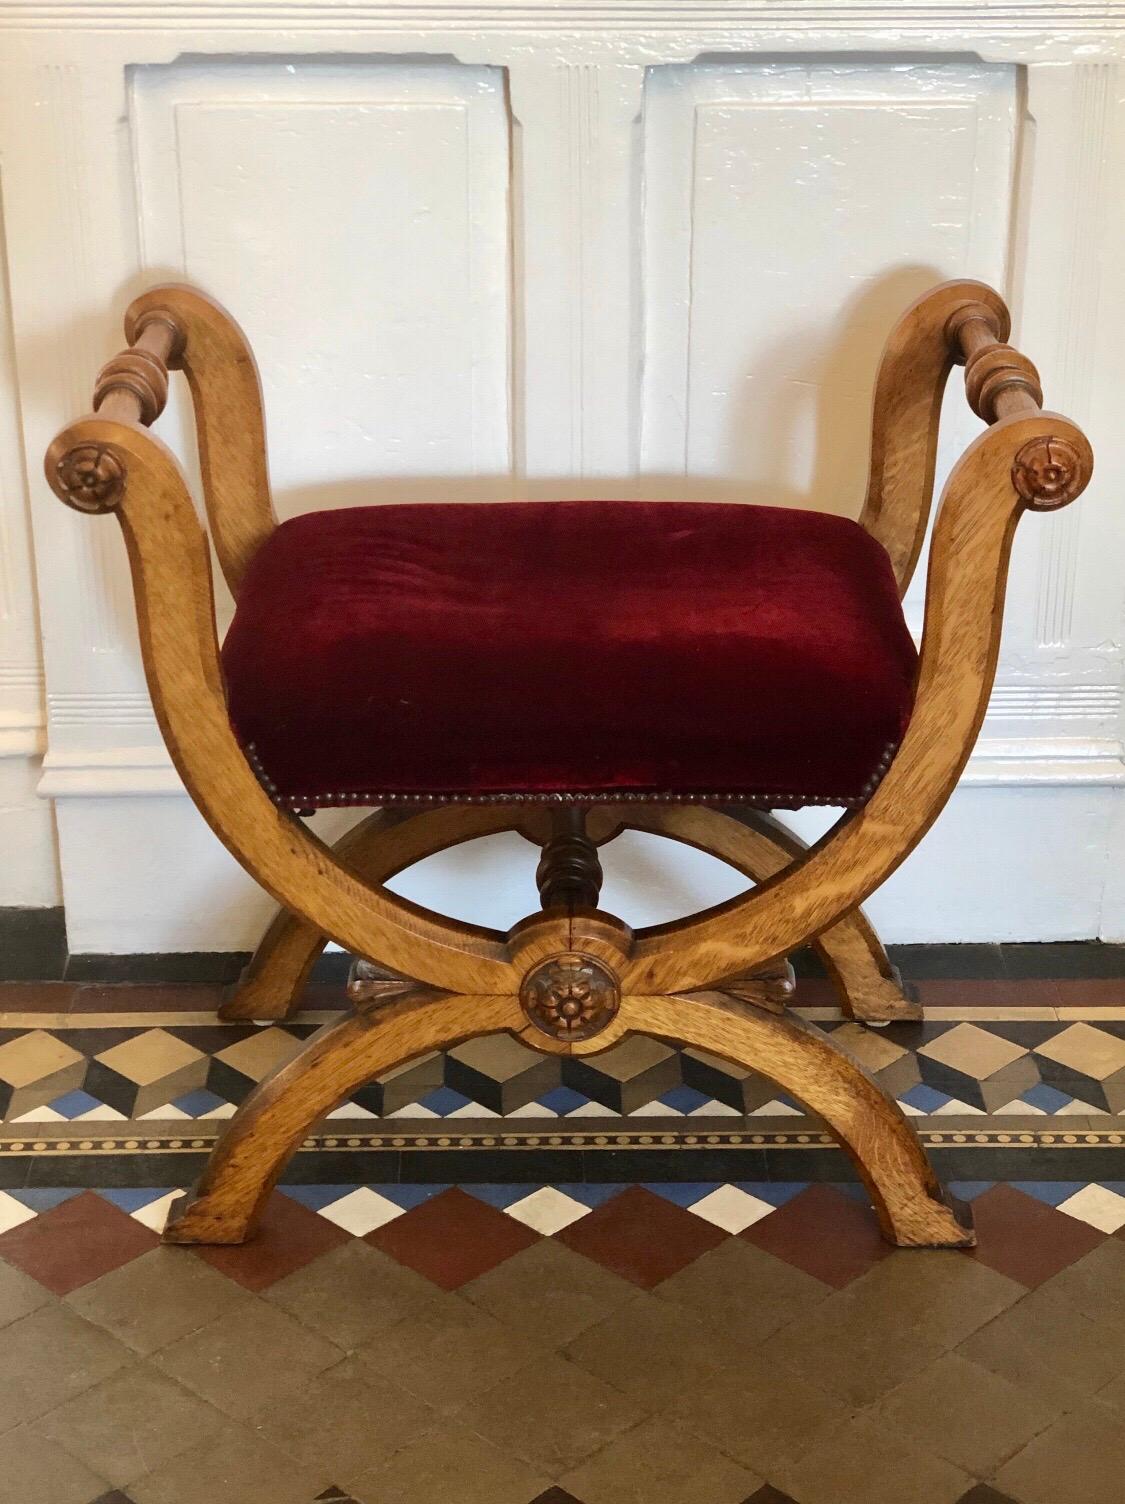 This English Country house bench is solid oak in the Classic Curule design. This window bench has a warm oak patina and rich red velvet seat.

Measures: Seat height 19.75